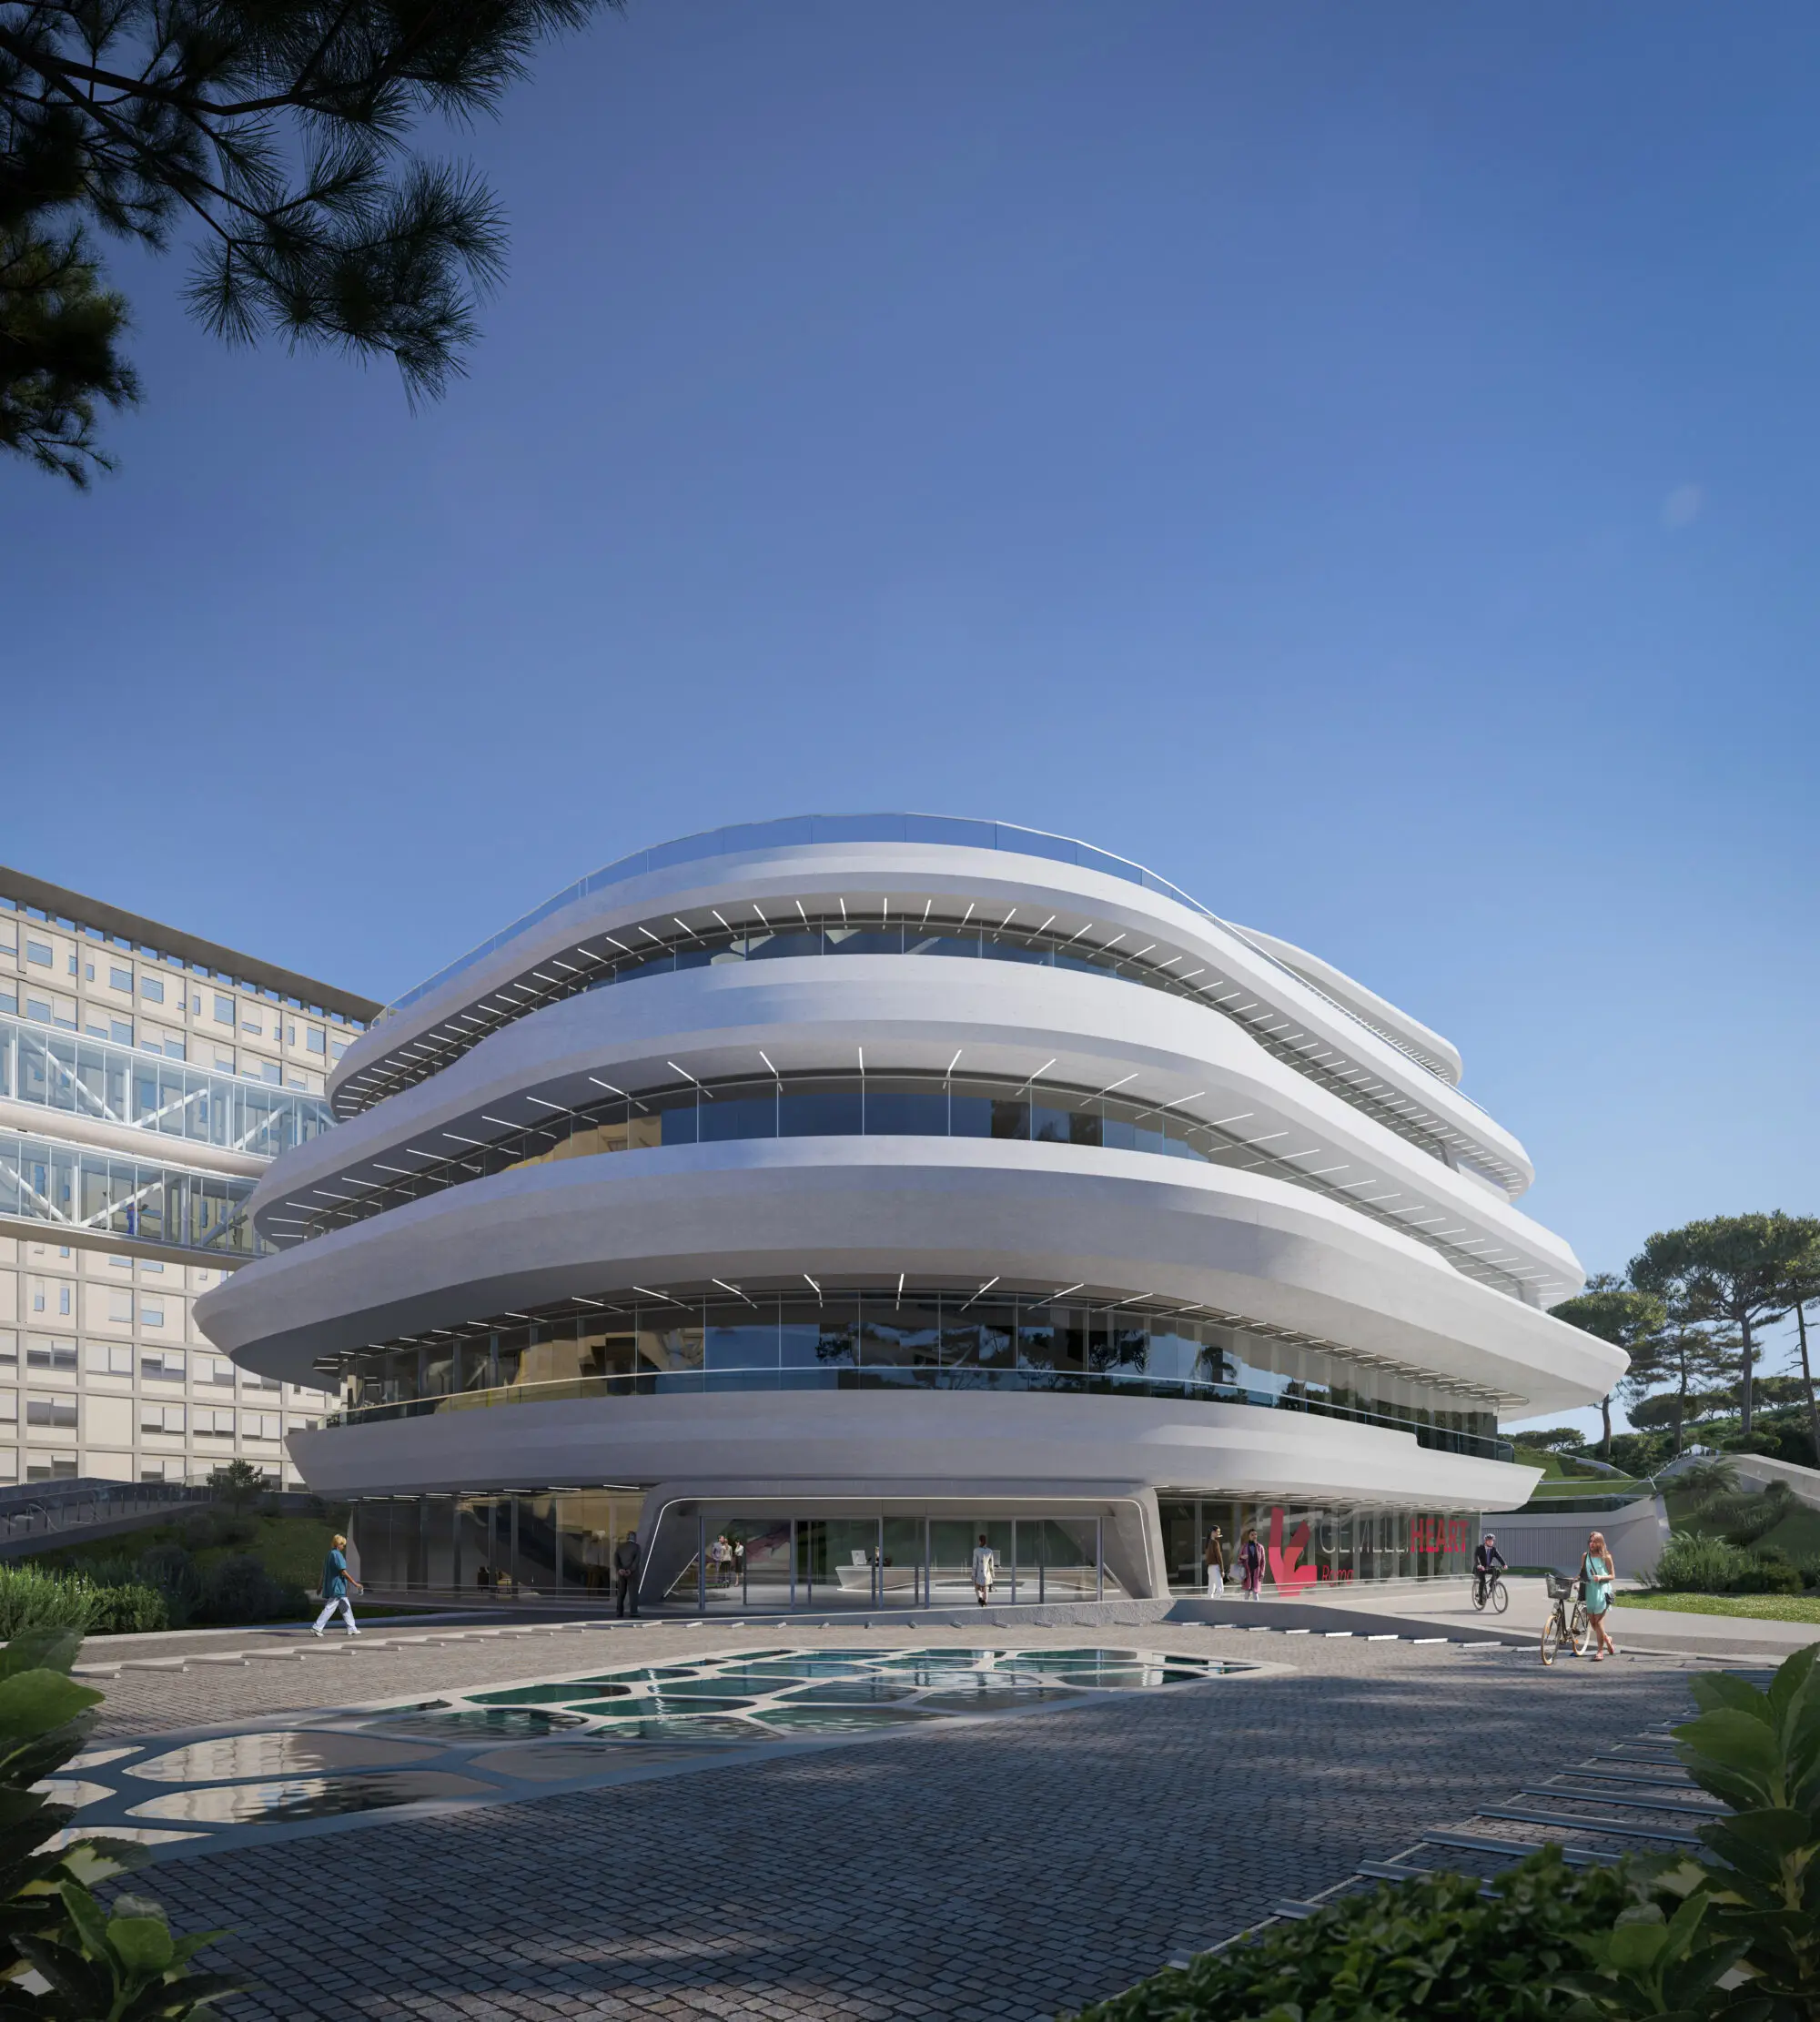 NEW HOSPITAL CENTER “CUORE”  – WINNING PROJECT